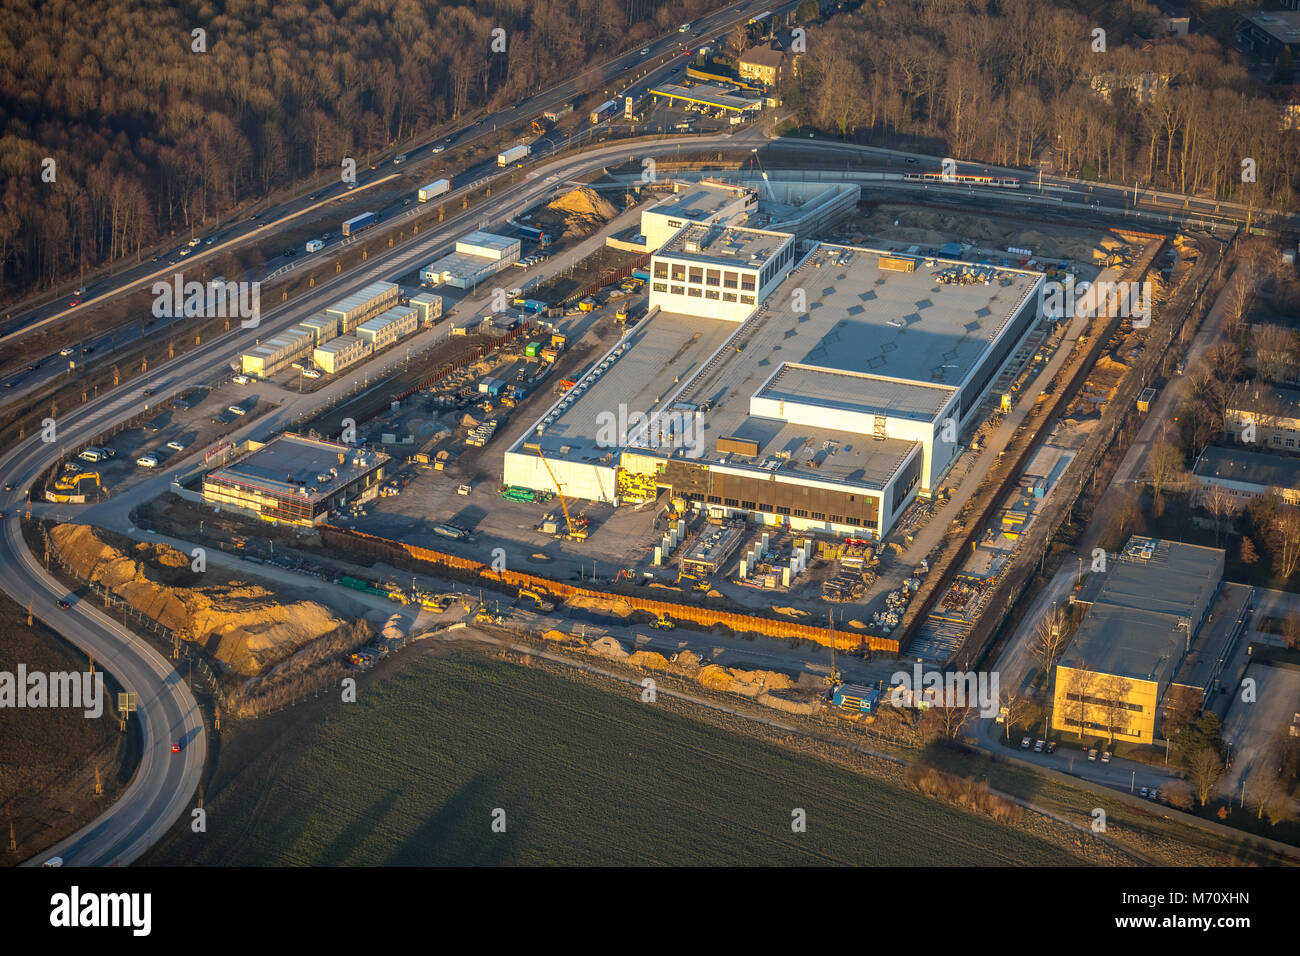 On the old barracks area, in Dortmund, builds the German Bundesbank, the largest money storage in Germany, Fort Knox in Dortmund in North Rhine-Westph Stock Photo